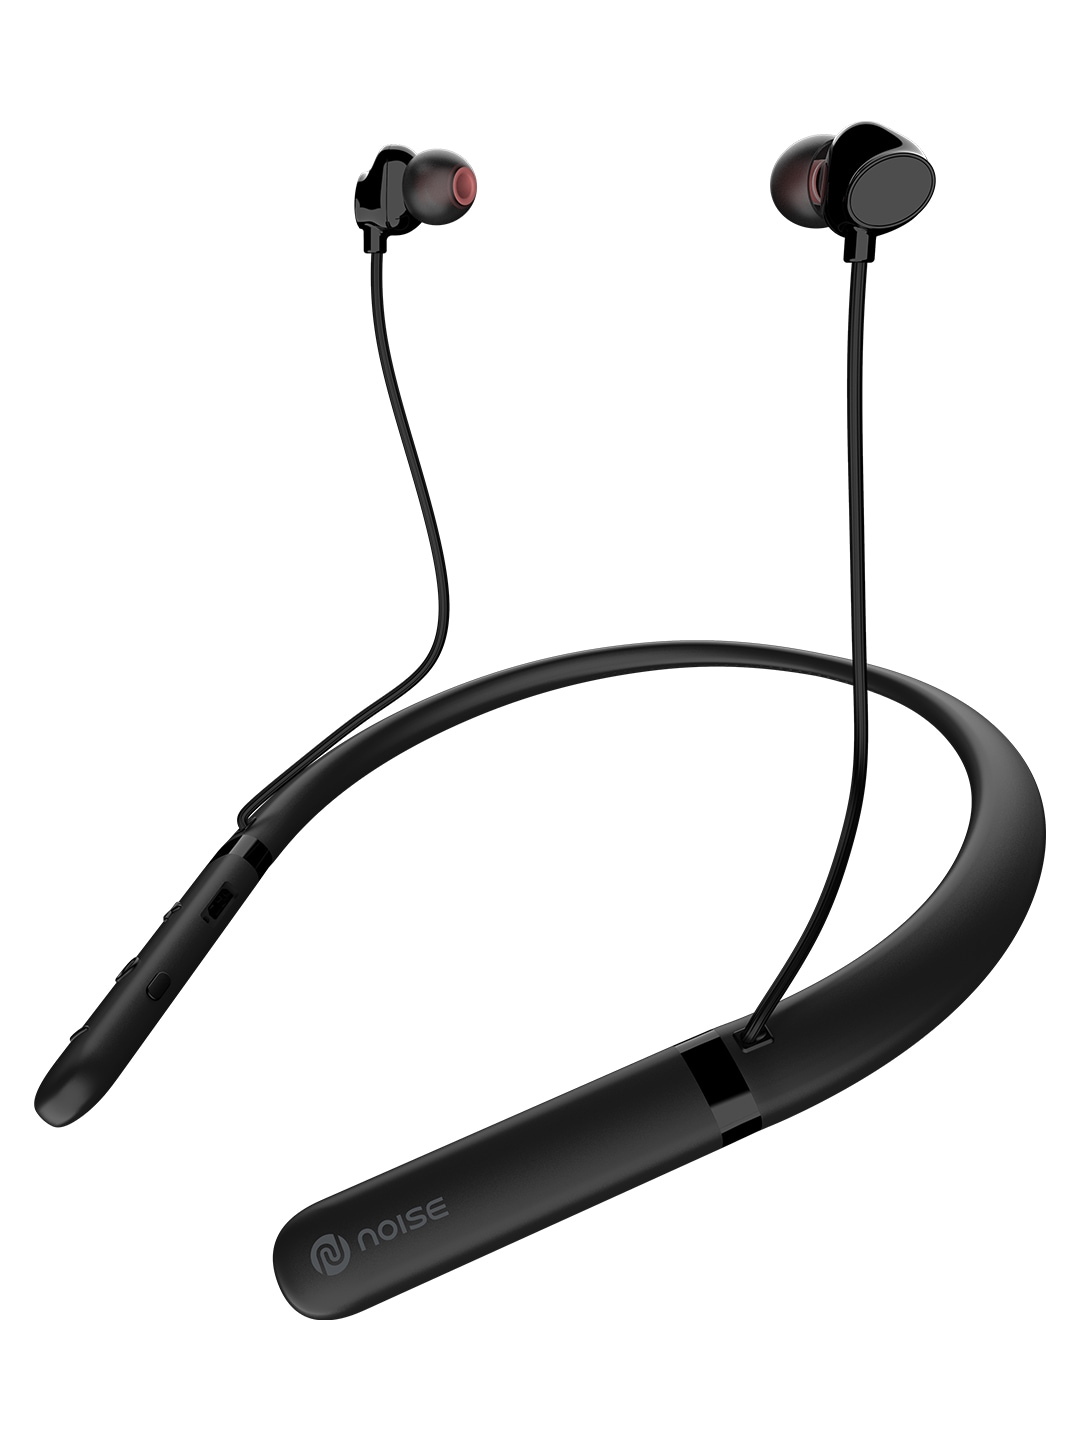 NOISE Tune CHARGE Neckband Bluetooth Headset with Mic - Jet Black Price in India